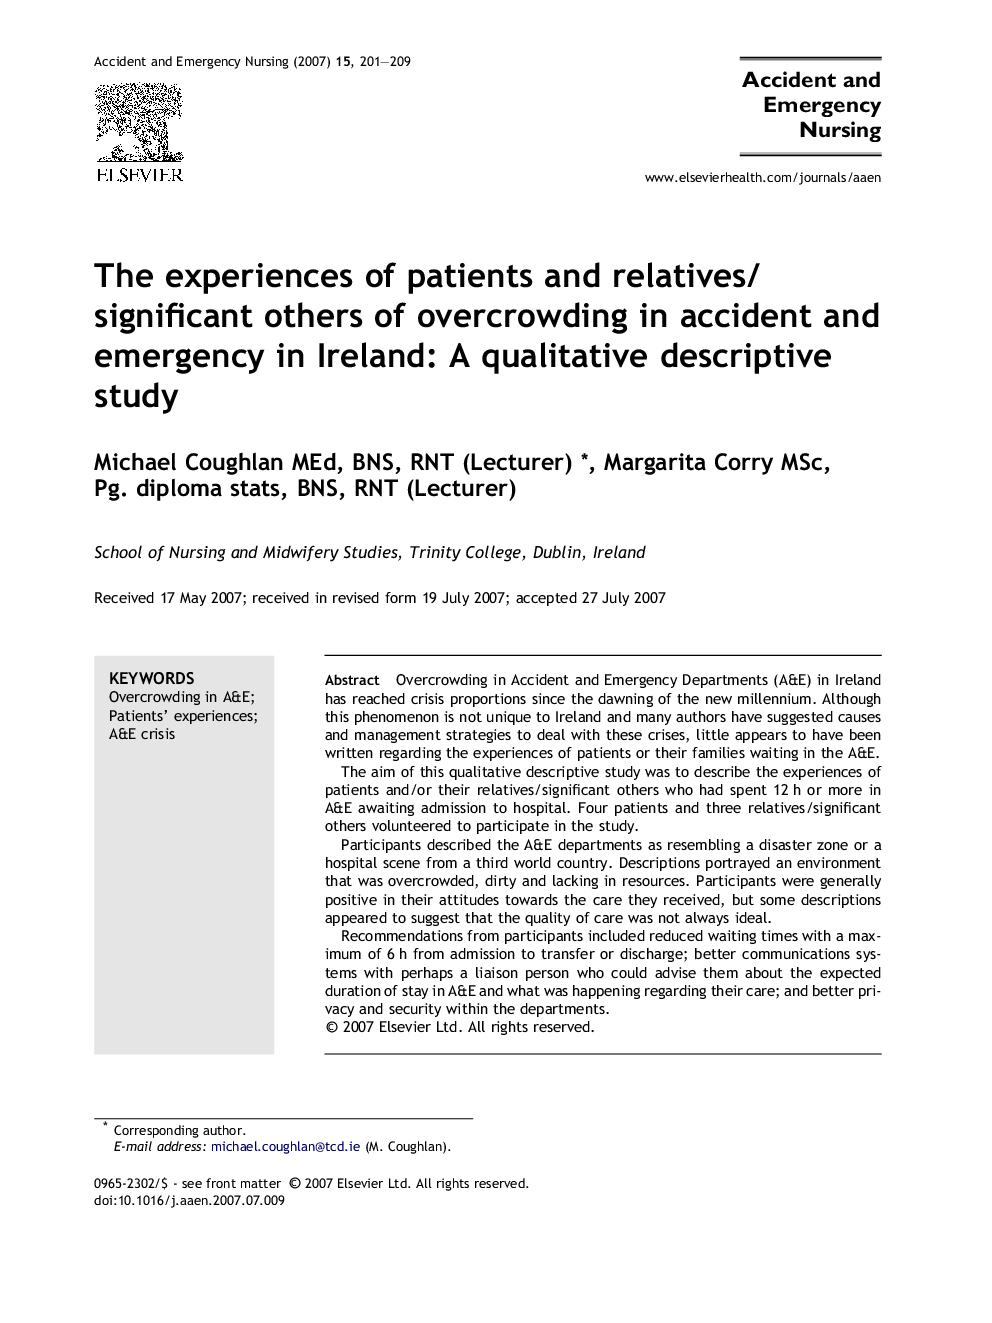 The experiences of patients and relatives/significant others of overcrowding in accident and emergency in Ireland: A qualitative descriptive study